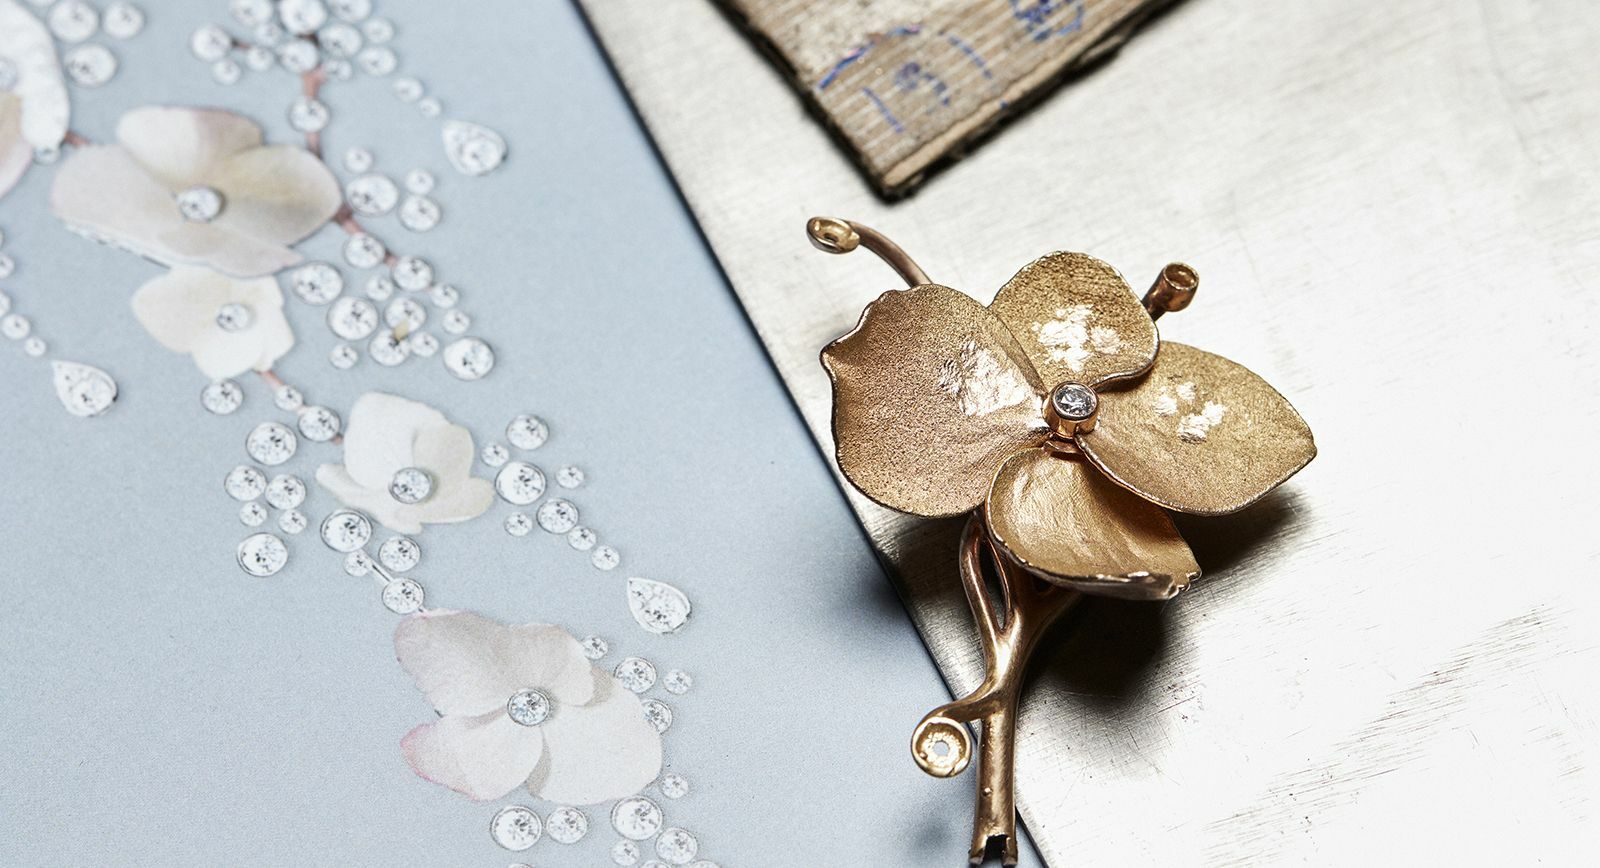 Boucheron: The French house recreates natures beauty with alchemy and technology